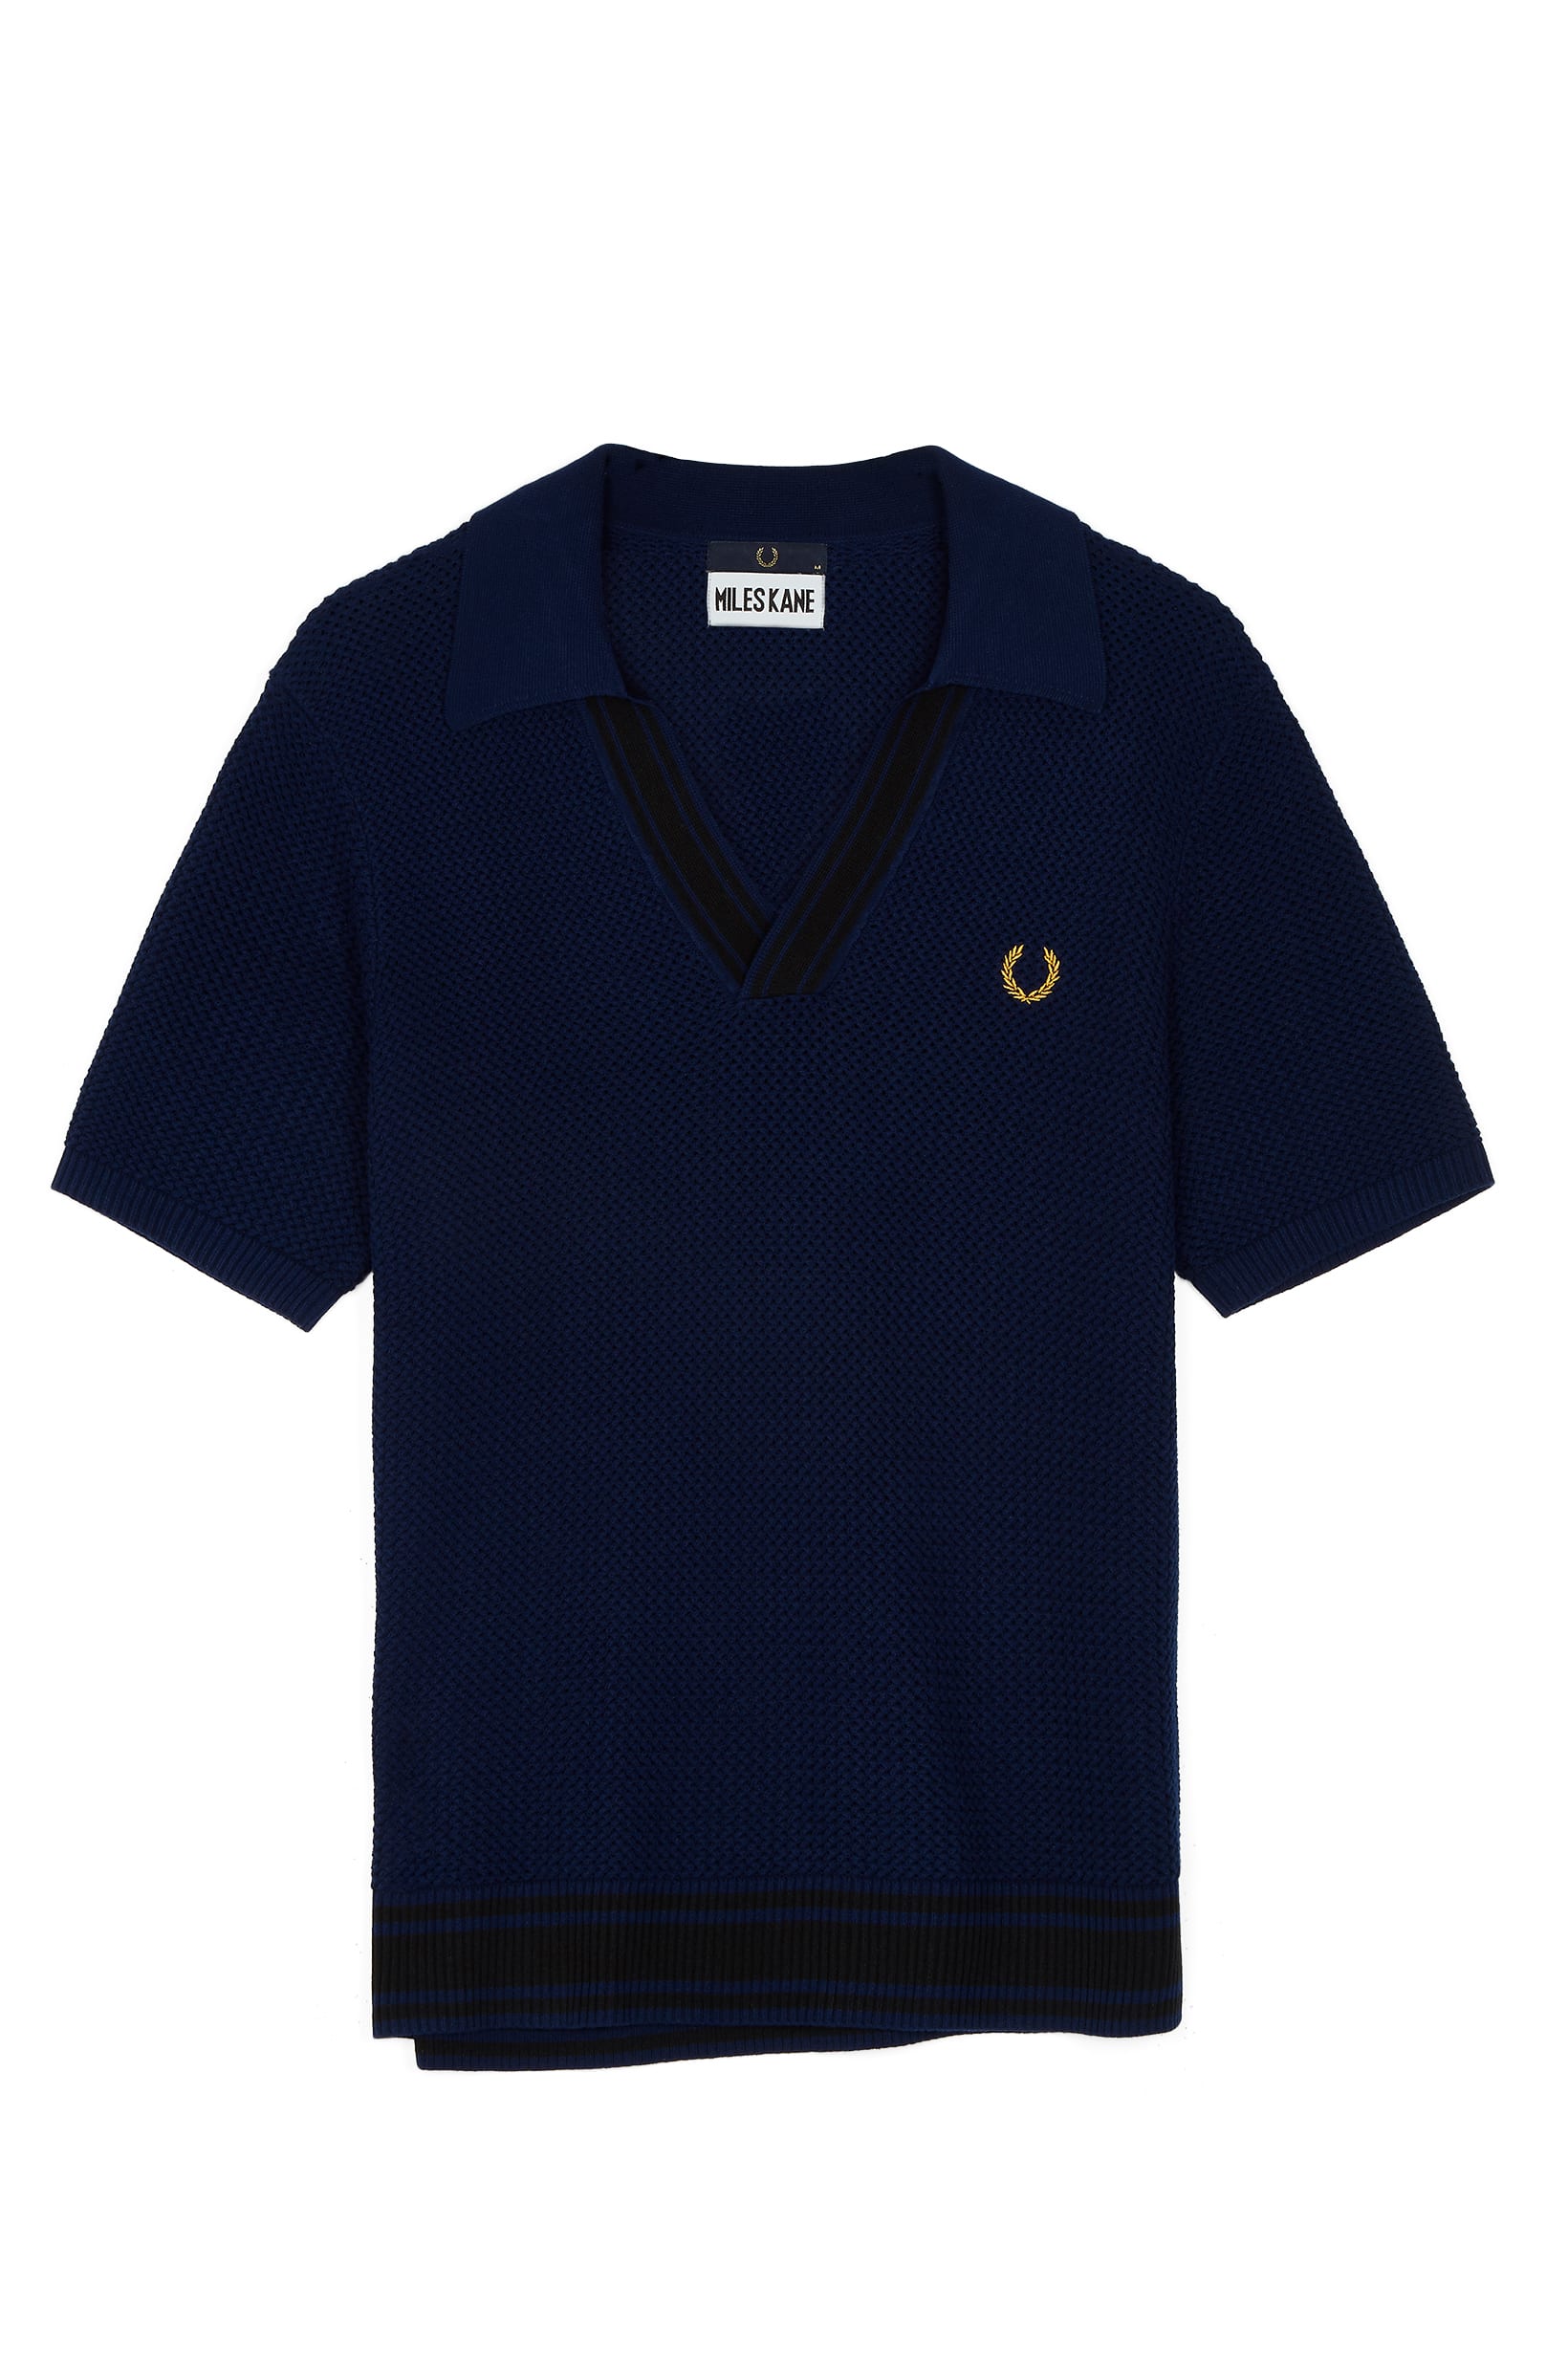 fredperrymiles10